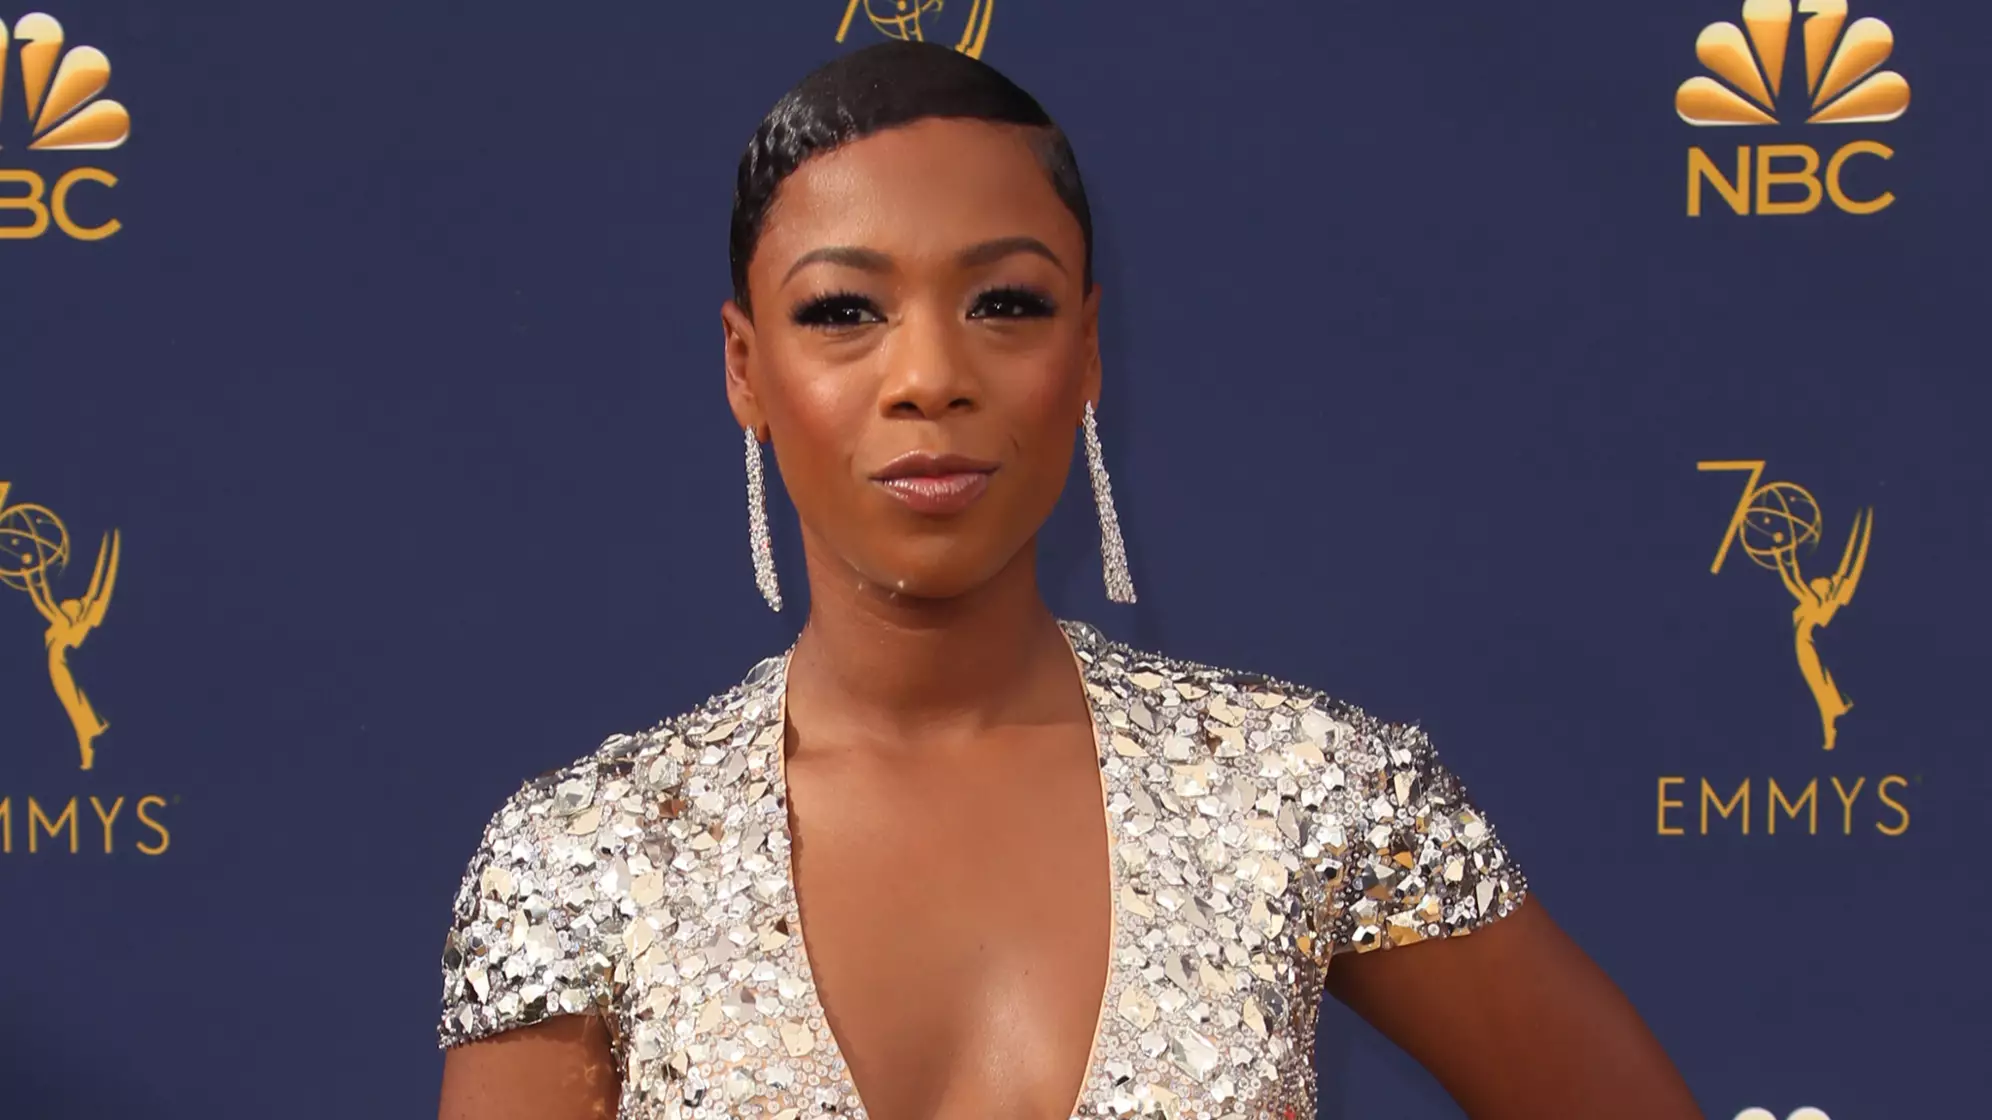 OITNB's Samira Wiley Says Falling In Love With Poussey Helped Her Love Herself